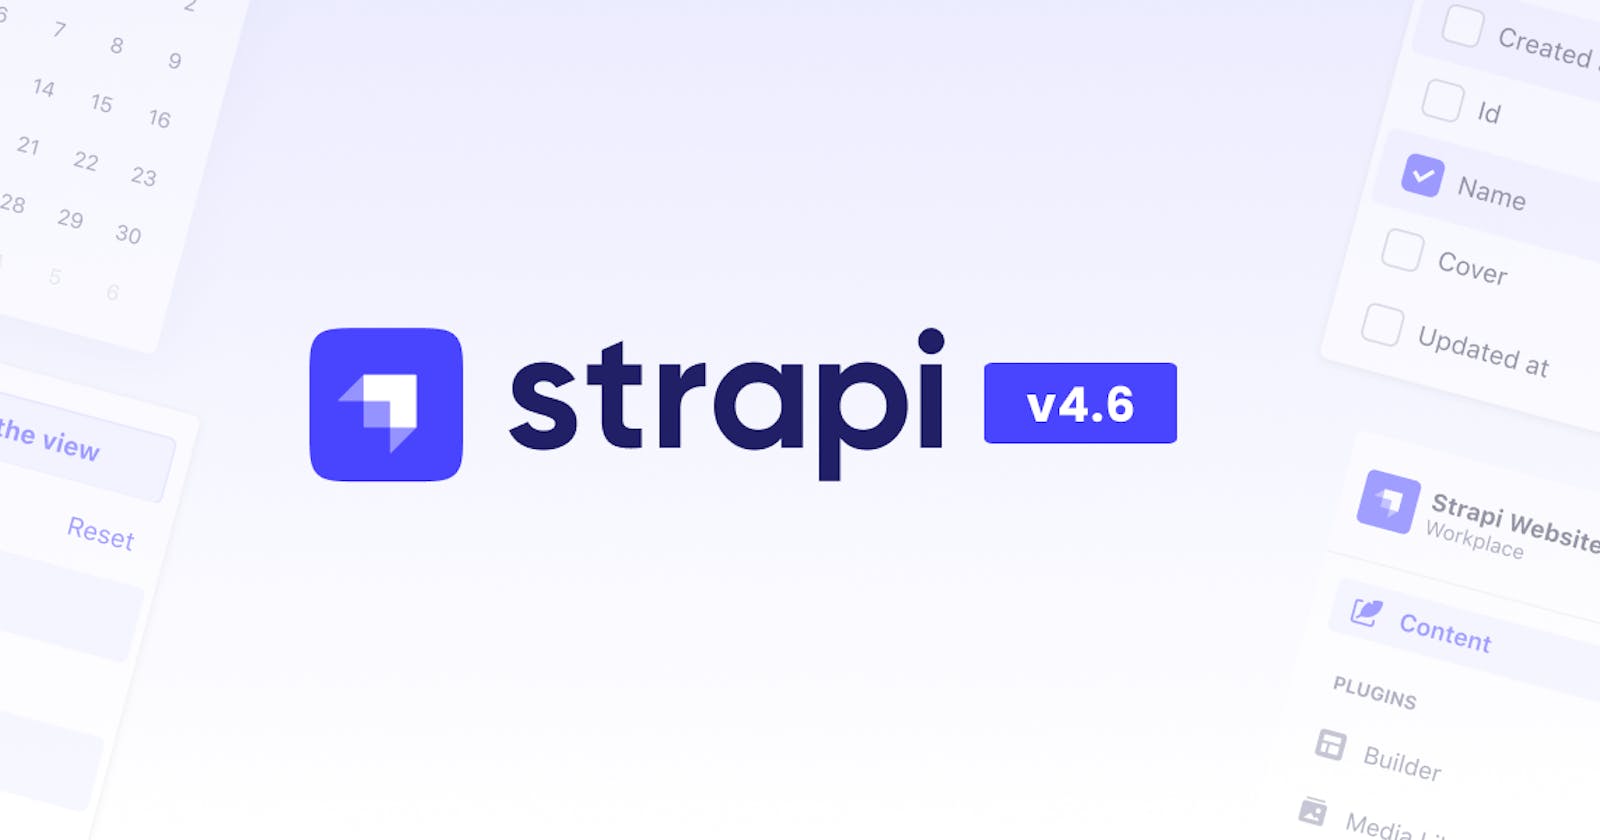 Introducing Strapi v4.6 with Data export & import, relations and component reordering, audit logs and more